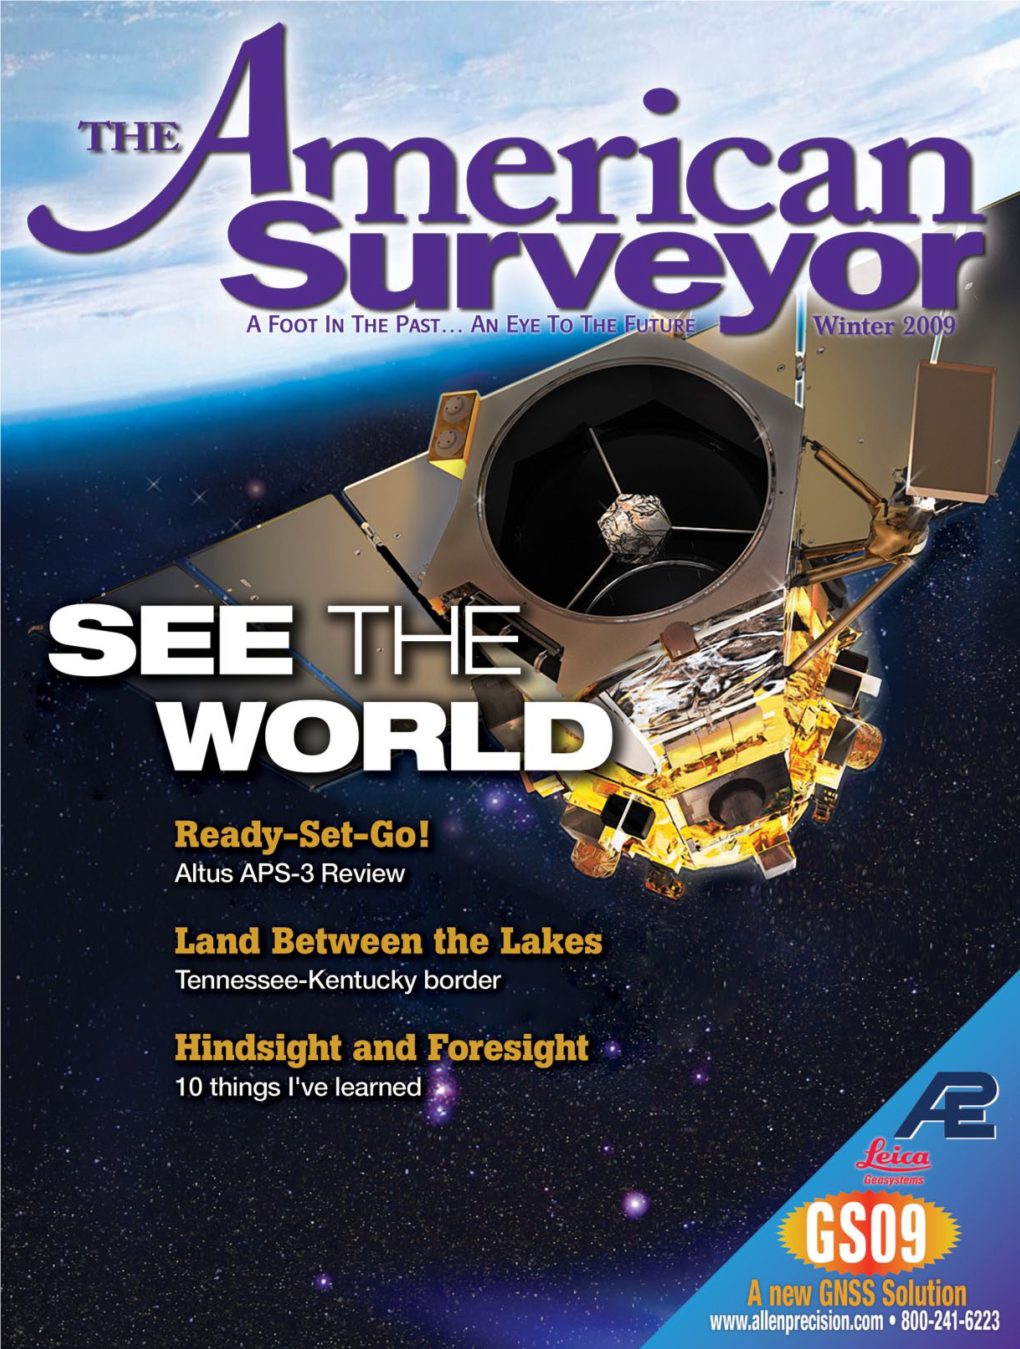 A Visit to Geoeye